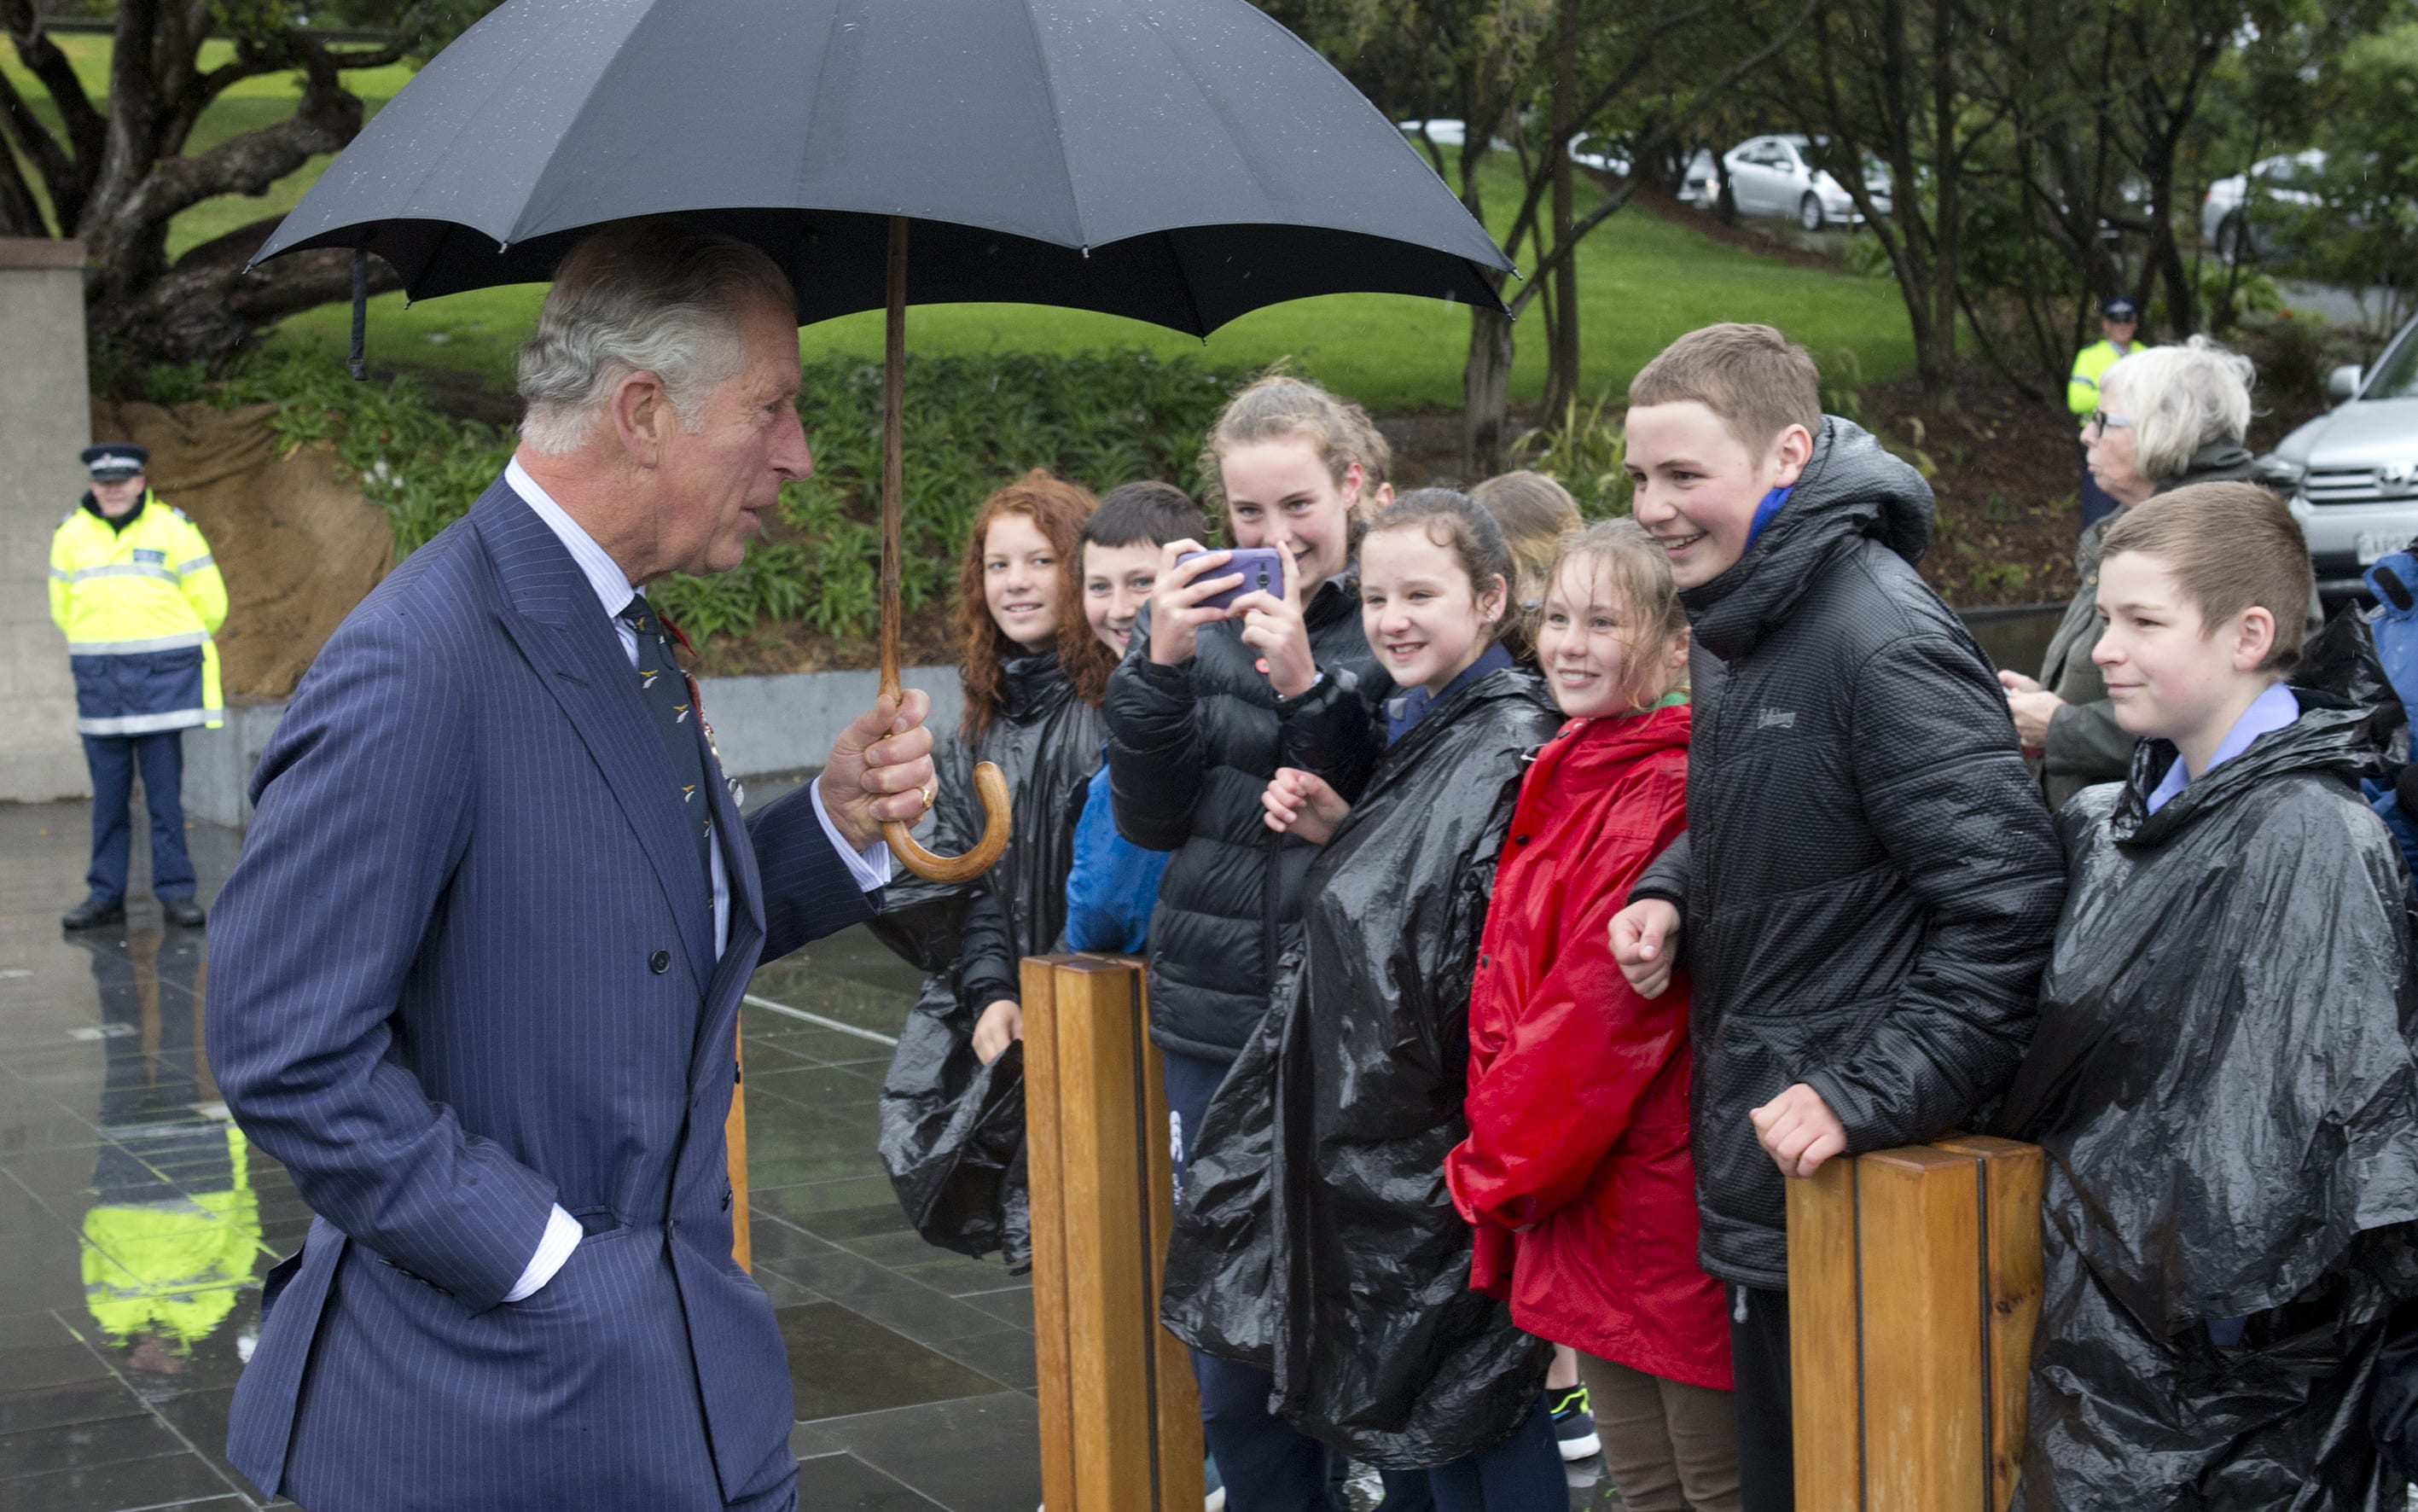 Prince Charles and his wife, Camilla, attended a wreath-laying ceremony at the Pukeahau National Memorial Park in front of a crowd of about 100 people.